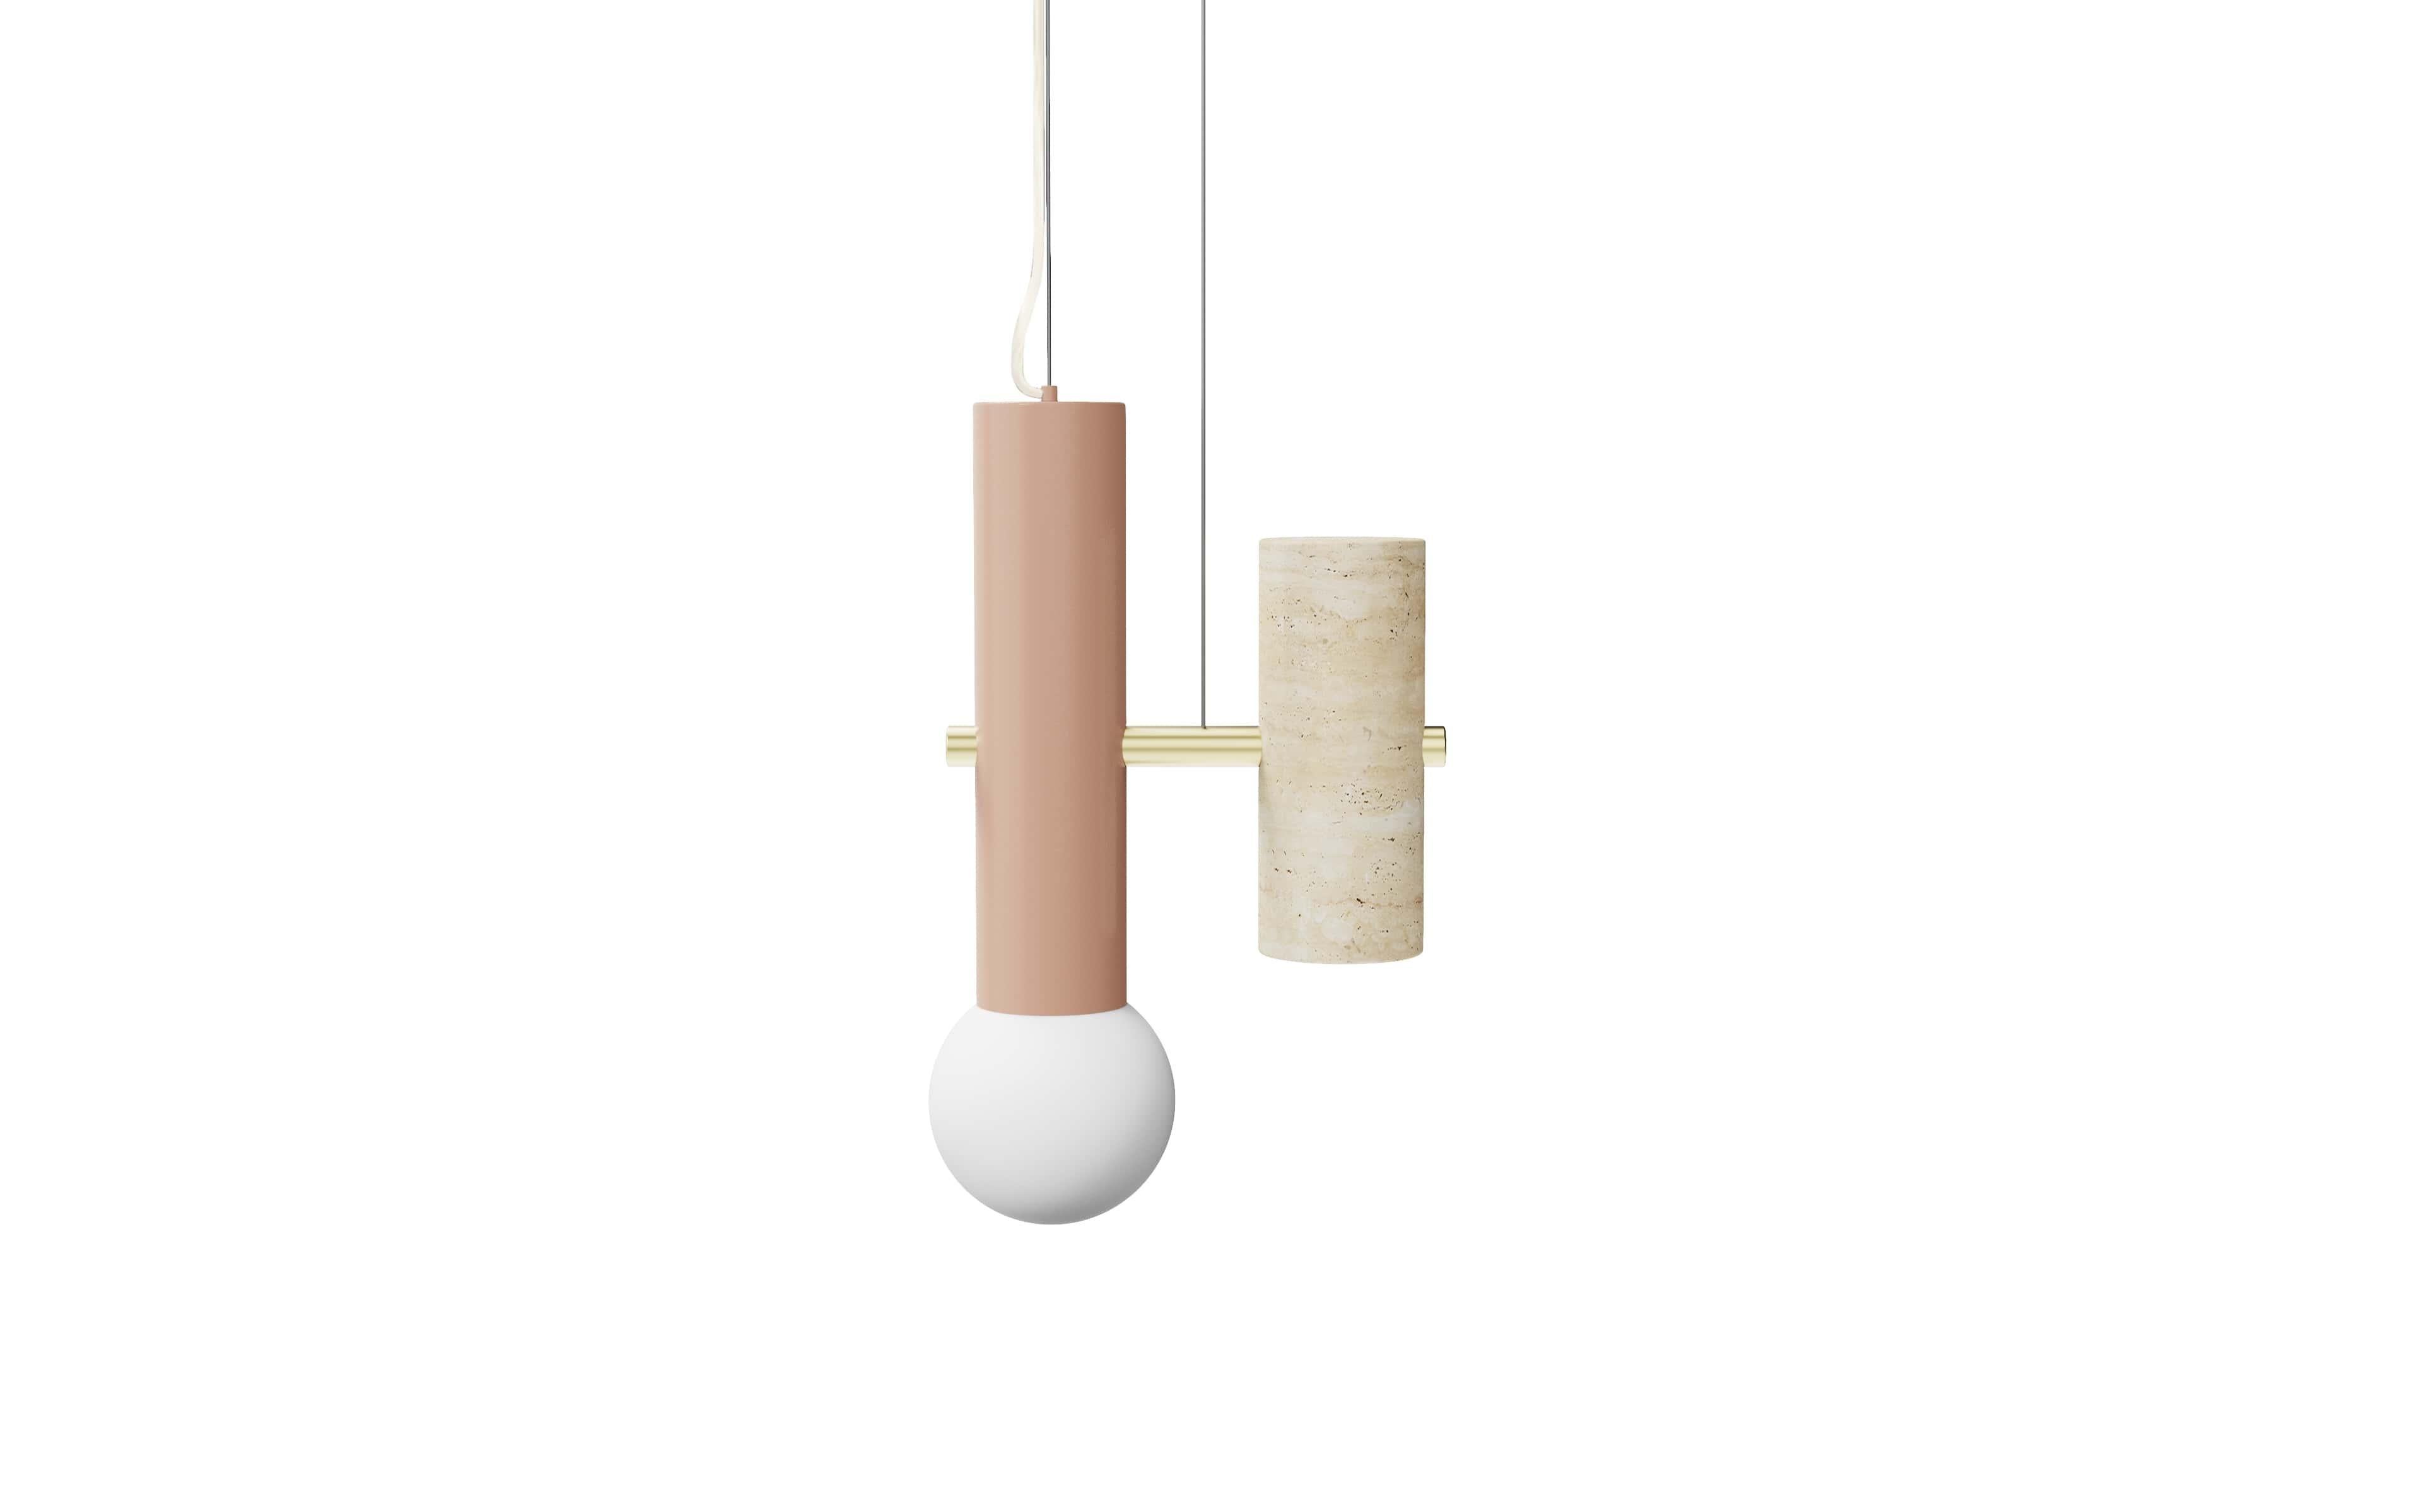 Pyppe Single I Lamp by Utu Lamps
Dimensions: 37 x 24 x 12 cm
Materials: Lacquered metal, brass, nickel/copper, travertine

All our lamps can be wired according to each country. If sold to the USA it will be wired for the USA for instance.

Dooq is a